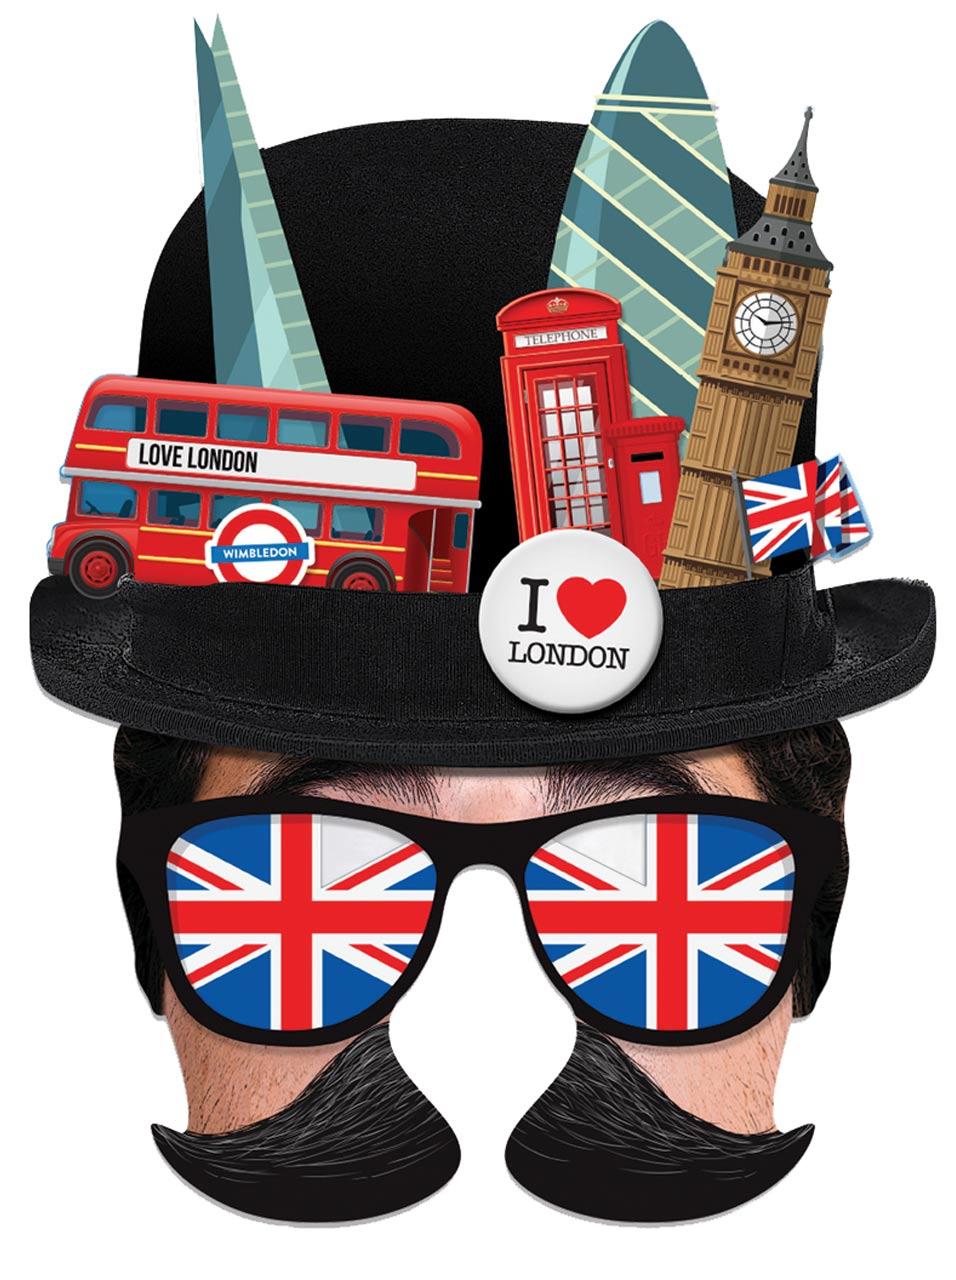 London Bowler Hat Tourist Half-Face Mask by Mask-erade LONBO01 available here at Karnival Costumes online party shop